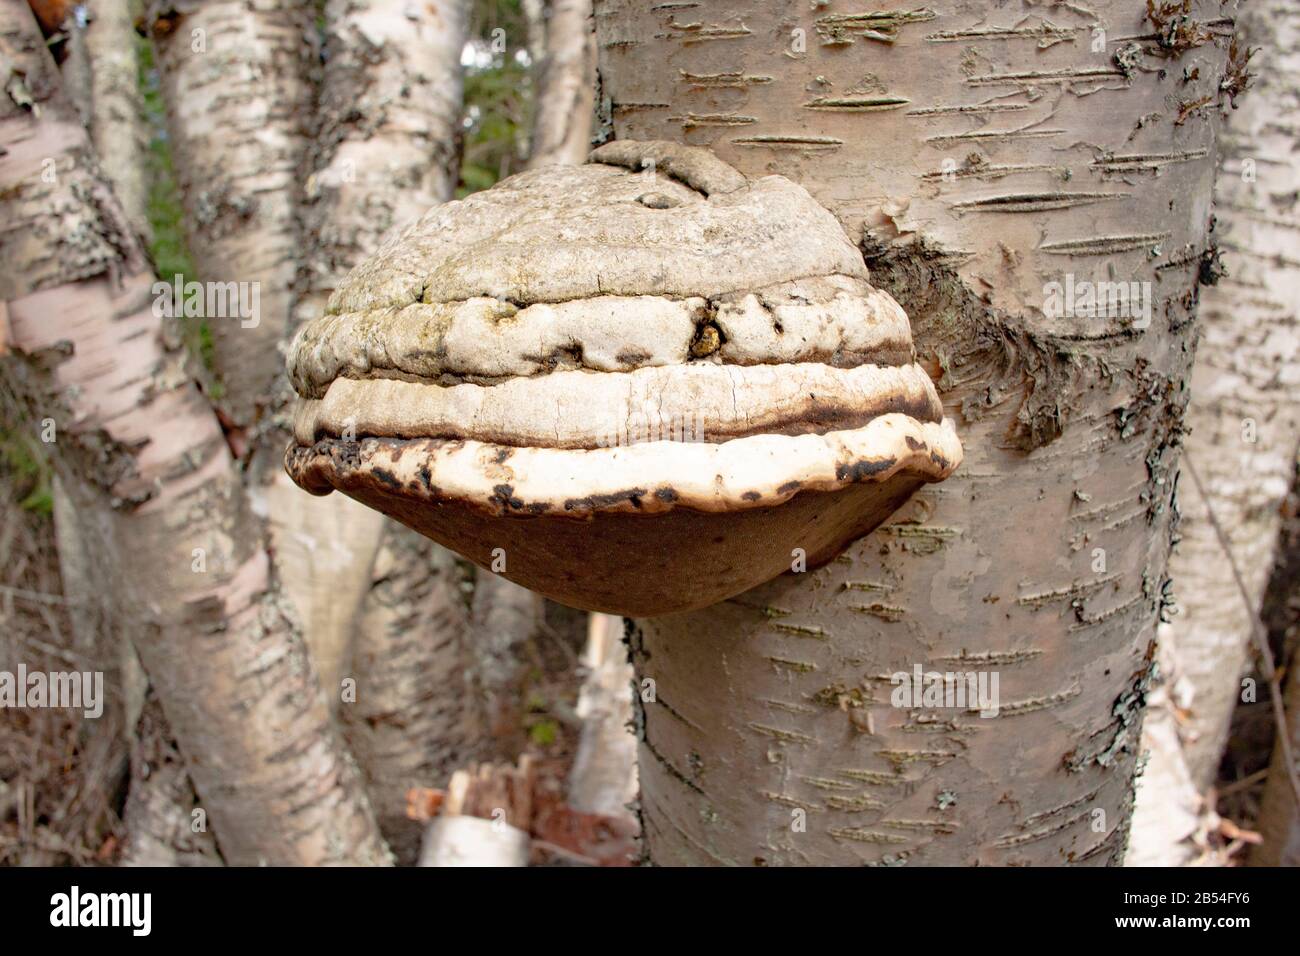 A Tinder Conk mushroom, Fomes fomentarius, growing on a dead red birch tree, Betula occidentalis, along Callahan Creek, in Troy, Montana. Stock Photo